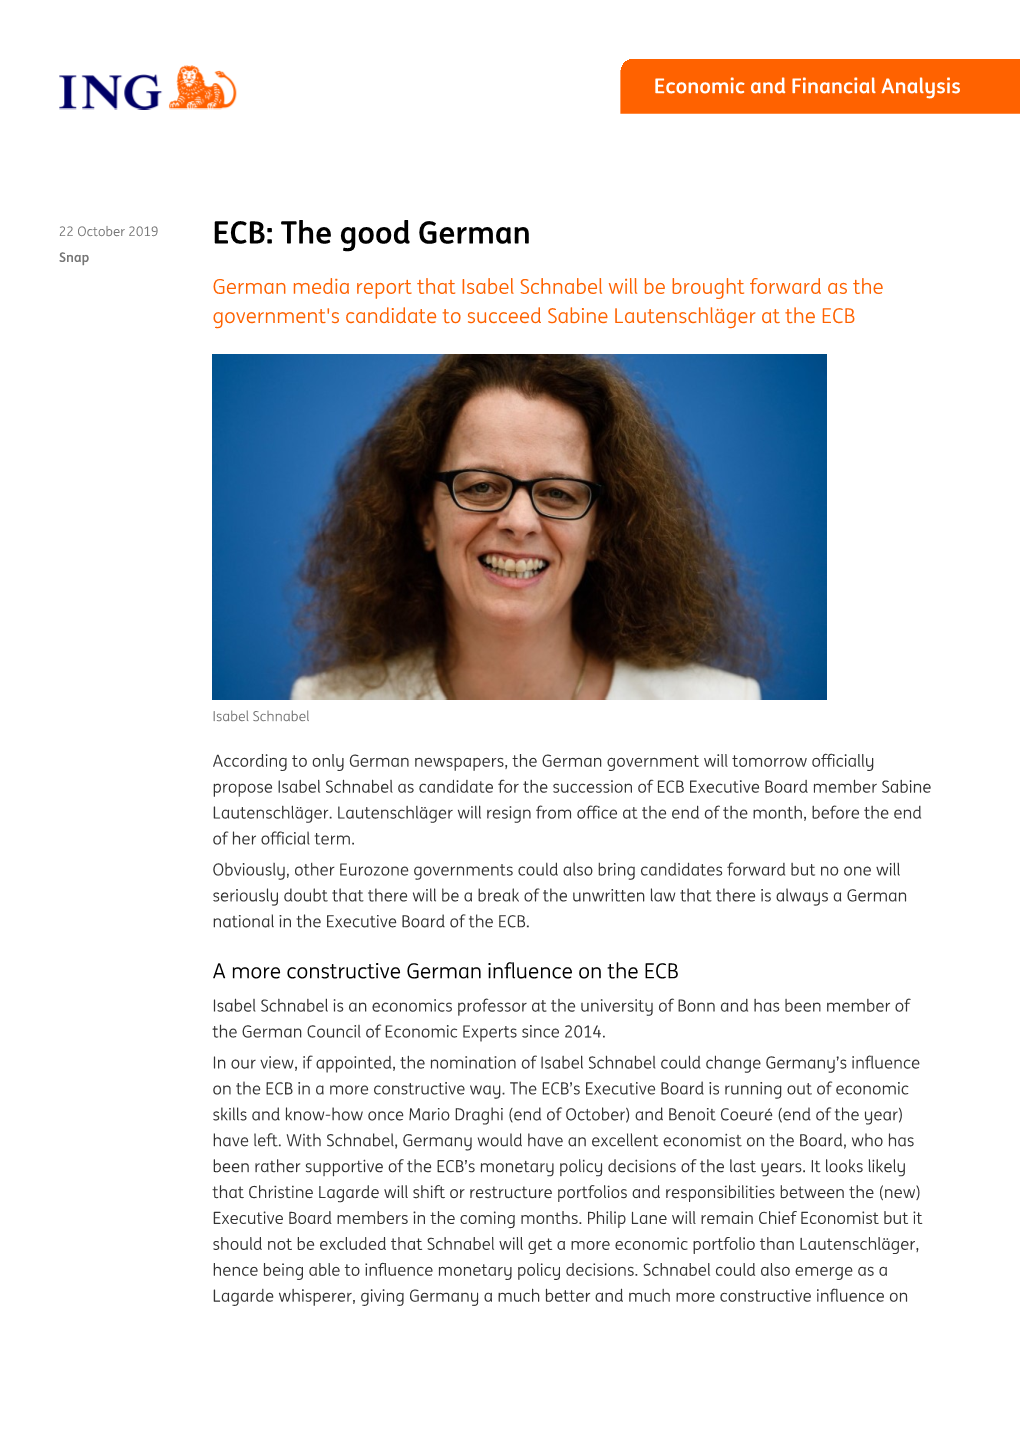 ECB: the Good German Snap German Media Report That Isabel Schnabel Will Be Brought Forward As the Government's Candidate to Succeed Sabine Lautenschläger at the ECB